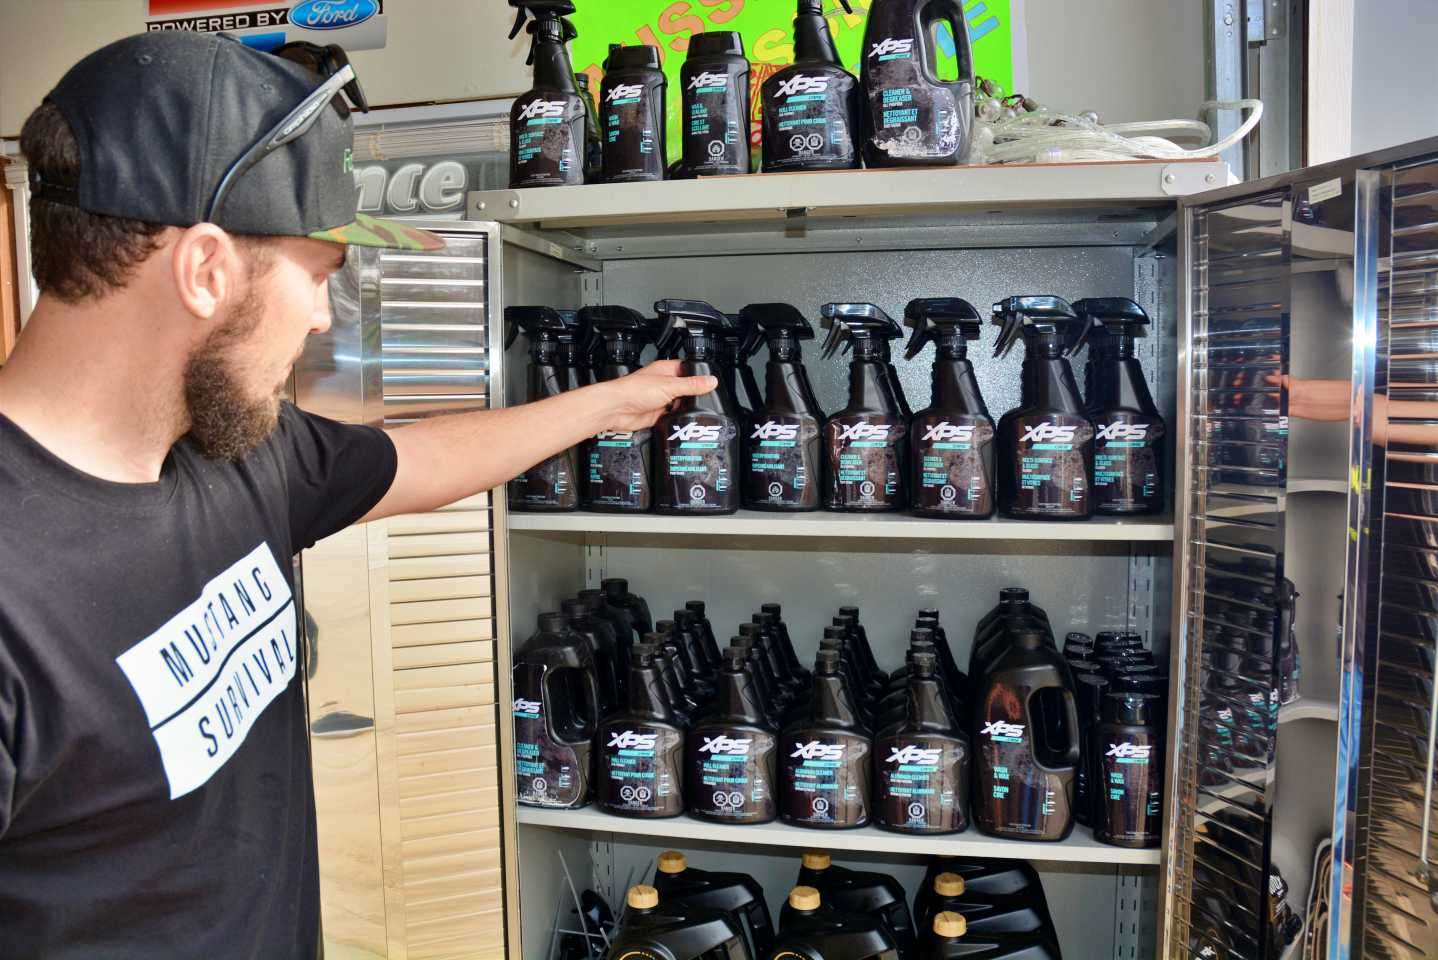 There is much work to be done and keeping the shine on the Bass Cat Eyra and Evinrude 250 H.O. is made possible with these cleaning products from XPS Oil & Lubricants, which also sells a lineup of marine care cleaners, waxes and polishes. 